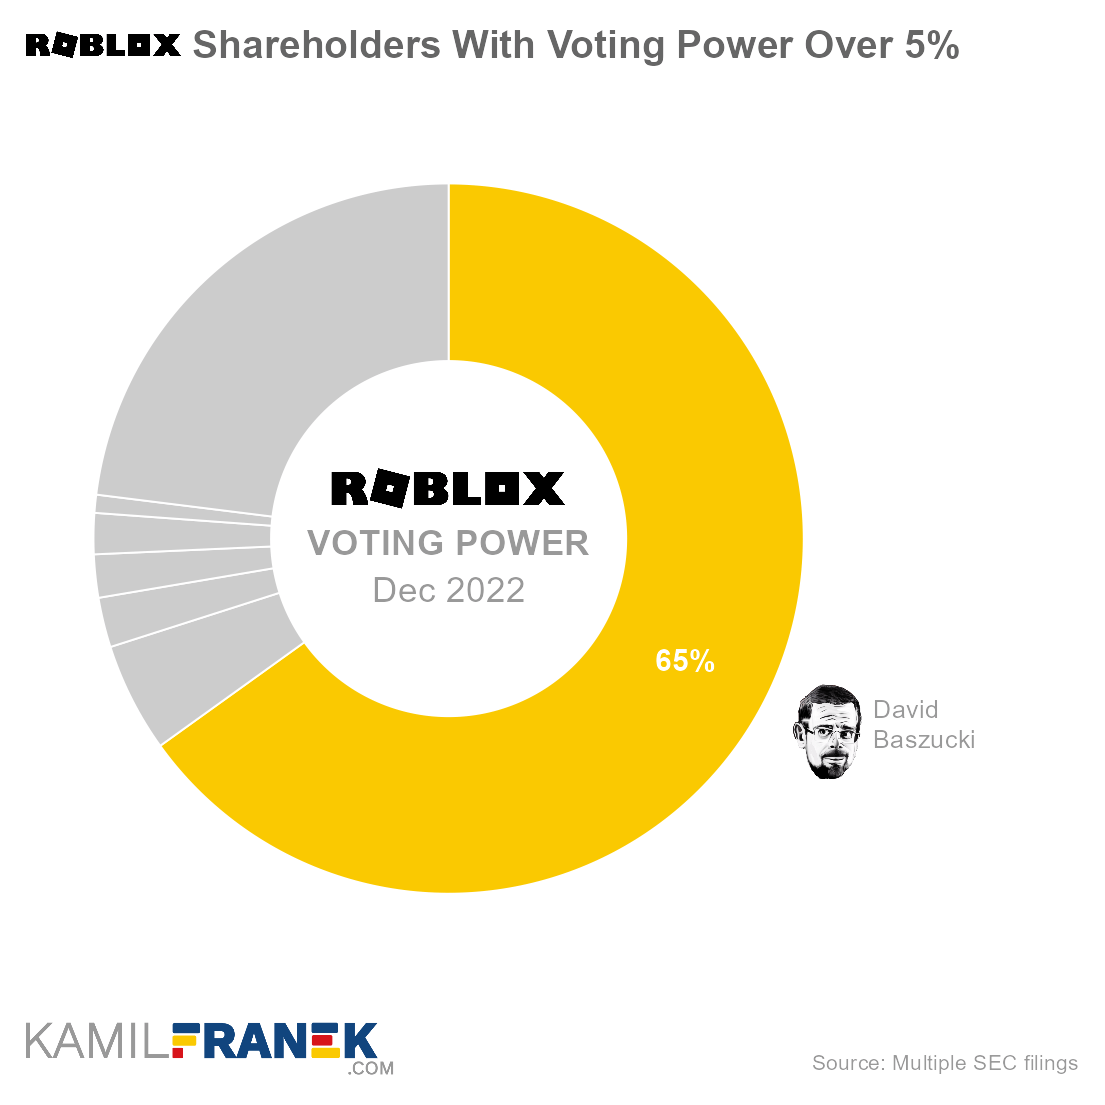 Who controls Roblox, largest shareholders donut chart